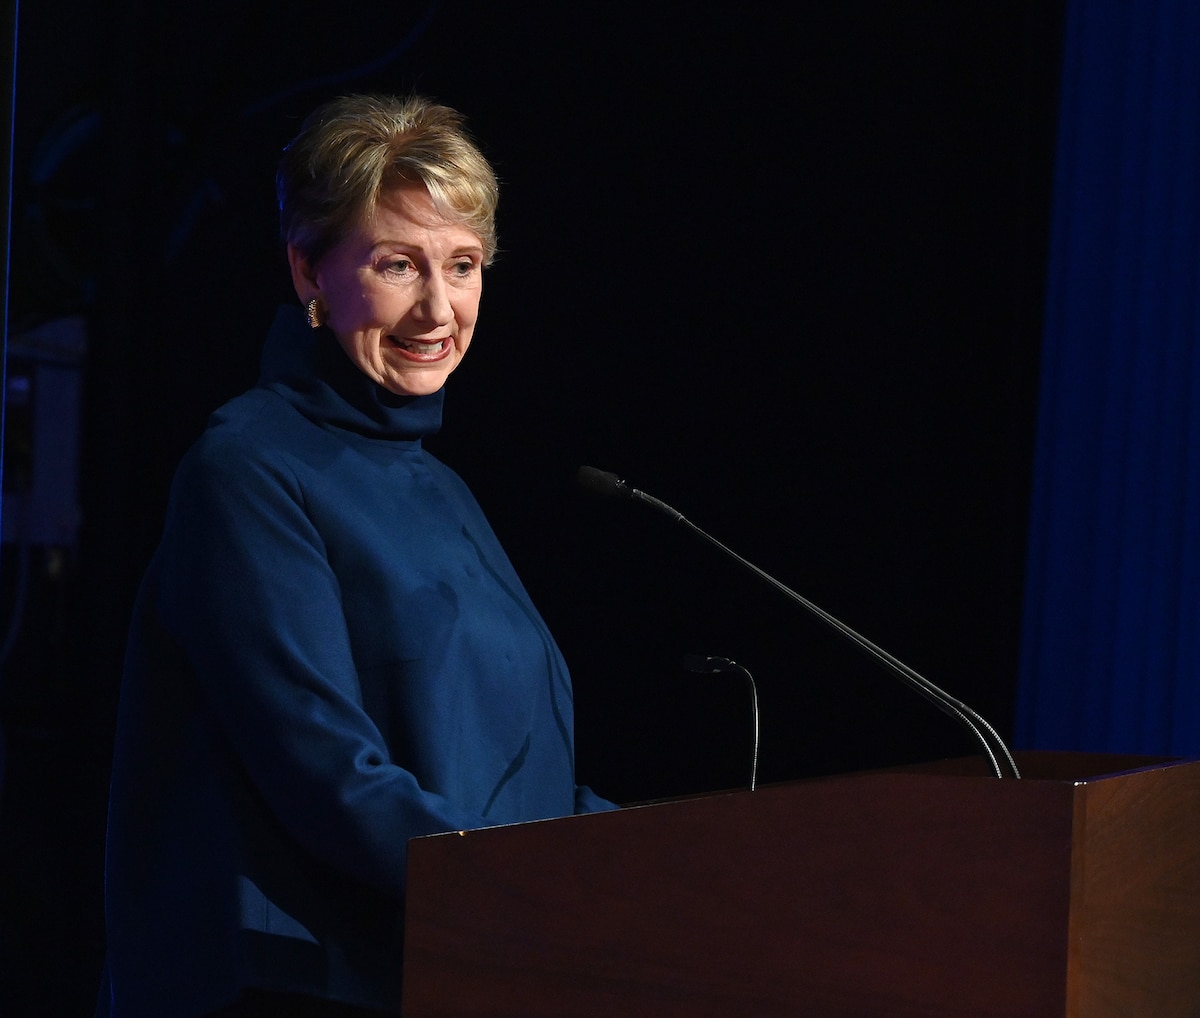 Former Secretary of the Air Force Barbara Barrett speaks at her portrait unveiling ceremony in the Pentagon, Arlington, Va., May 13, 2022. Barrett led the Department of the Air Force from 2019 to 2021. (U.S. Air Force photo by Andy Morataya)